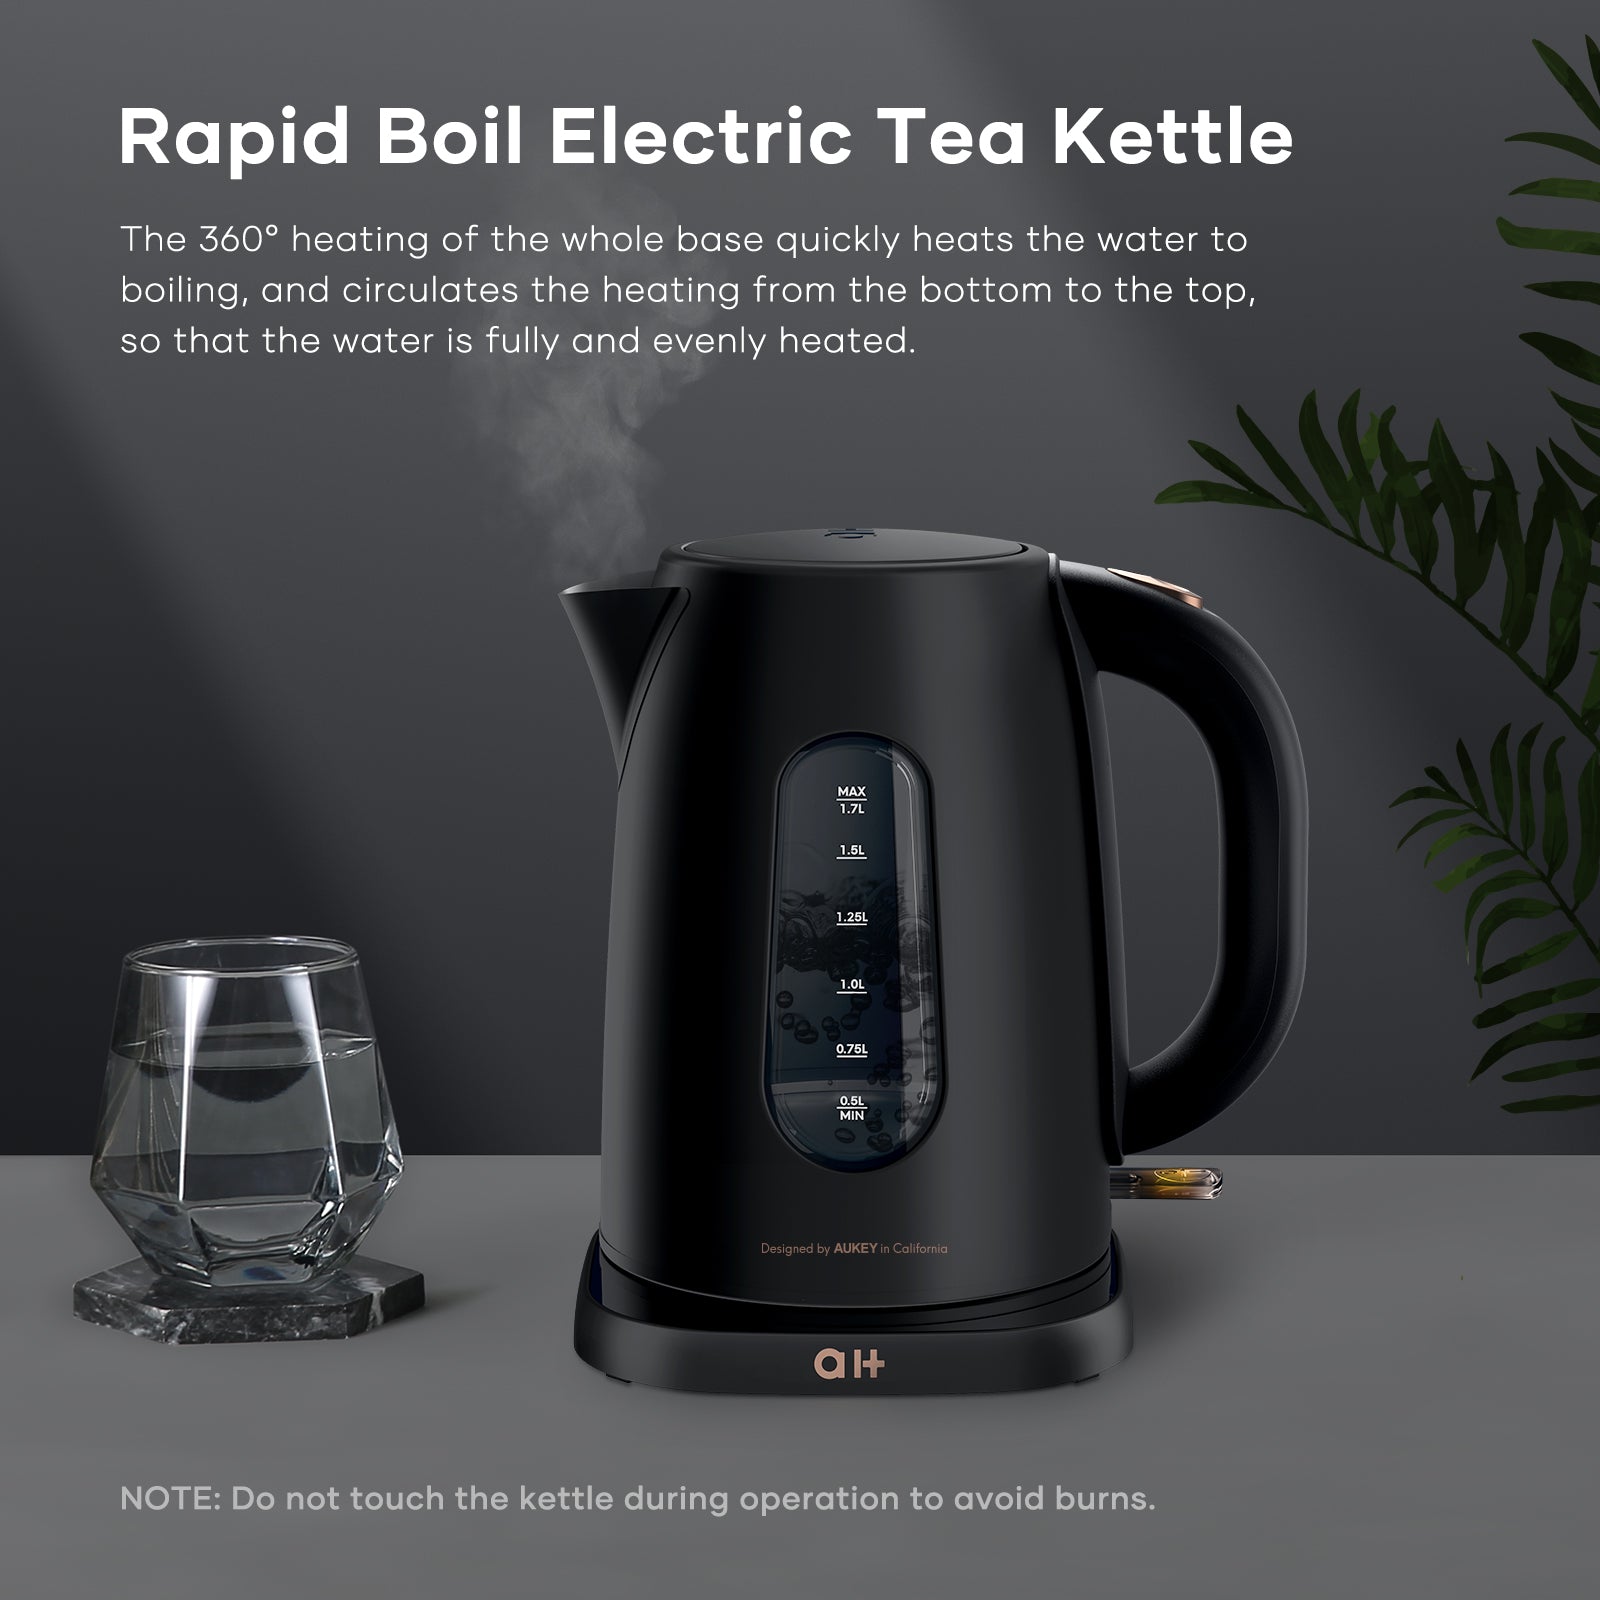  Speed-Boil Electric Kettle For Coffee & Tea - 1.7L